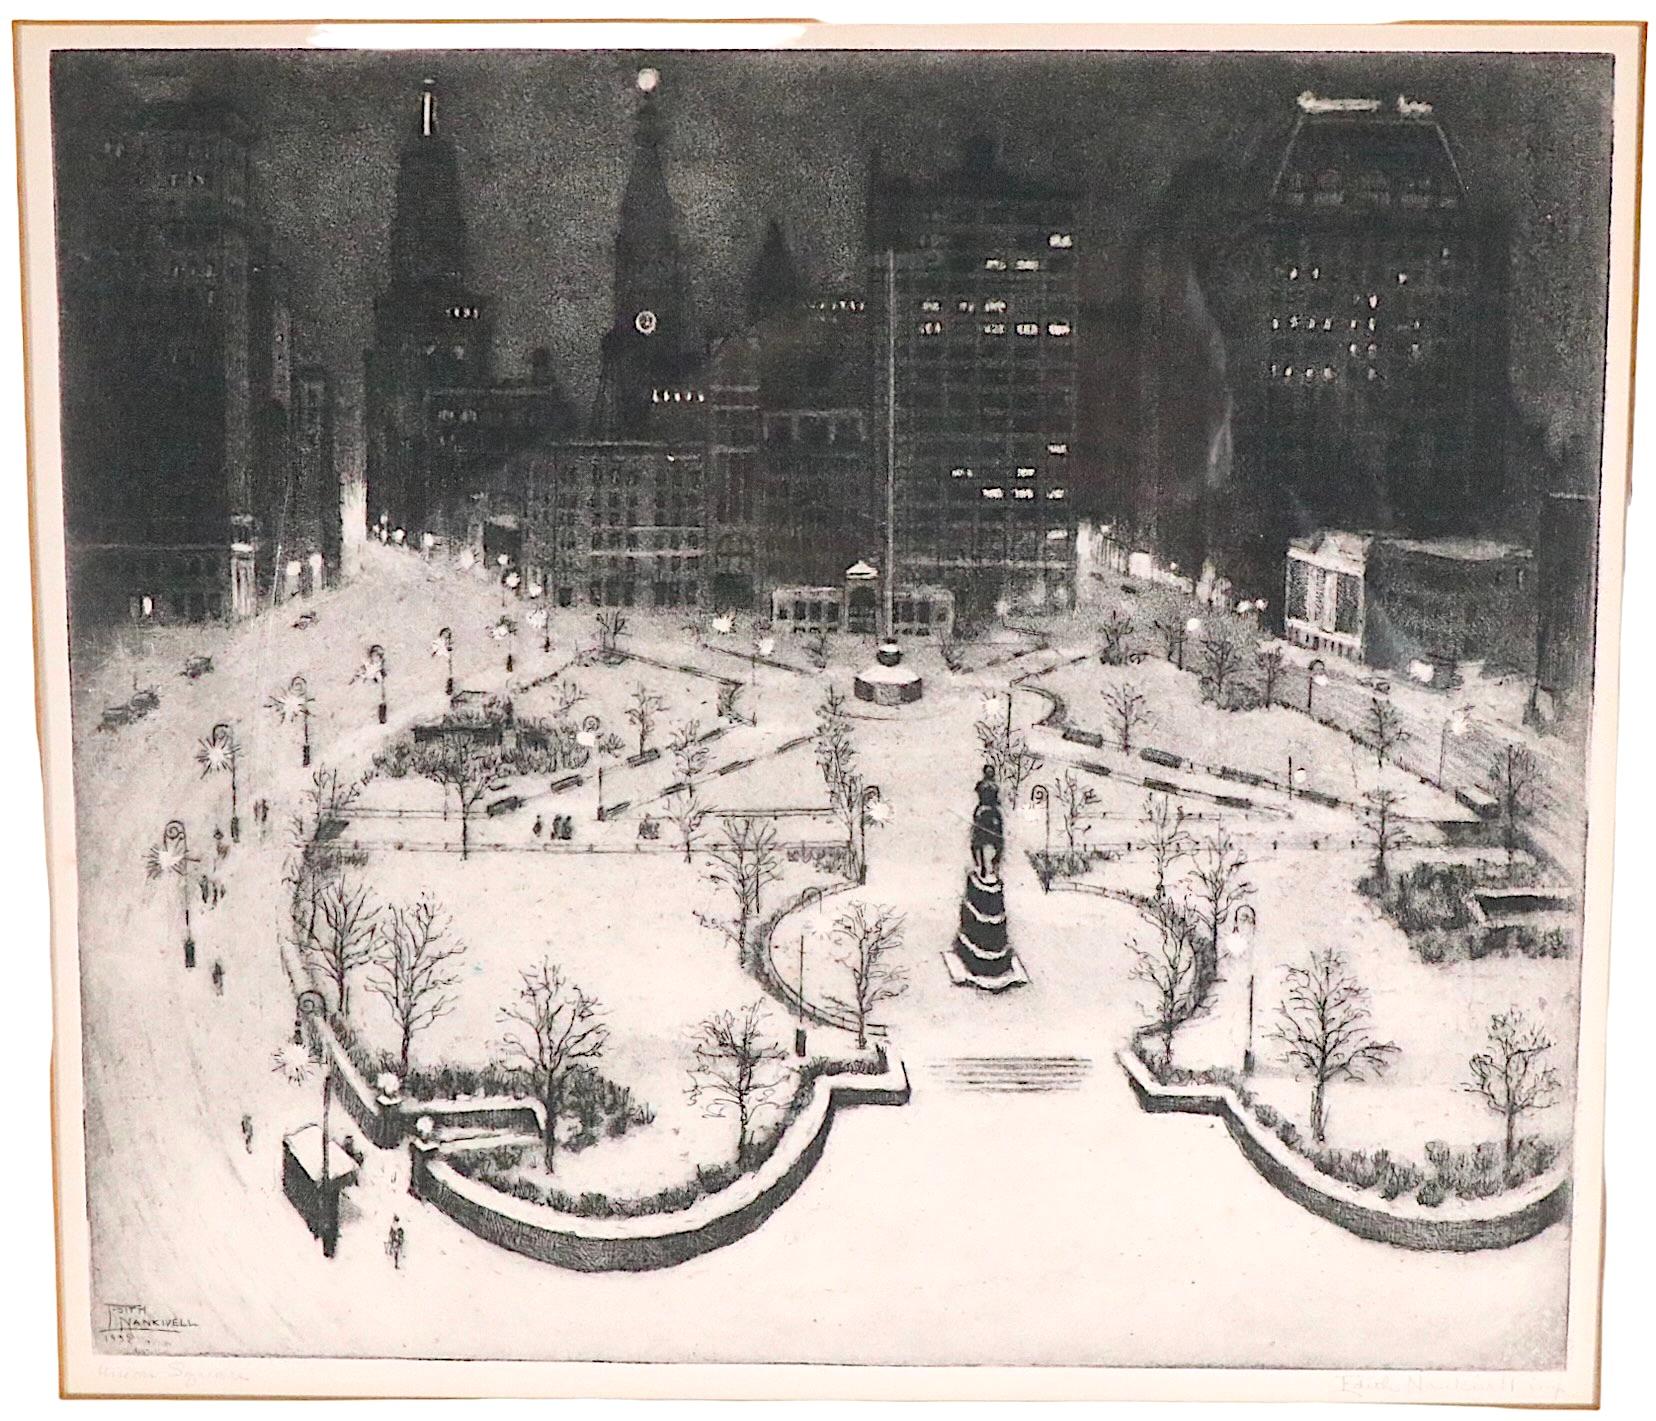 NYC Scene Aquatint Etching by Edith Nankivell Pencil Signed Limited Edition  1